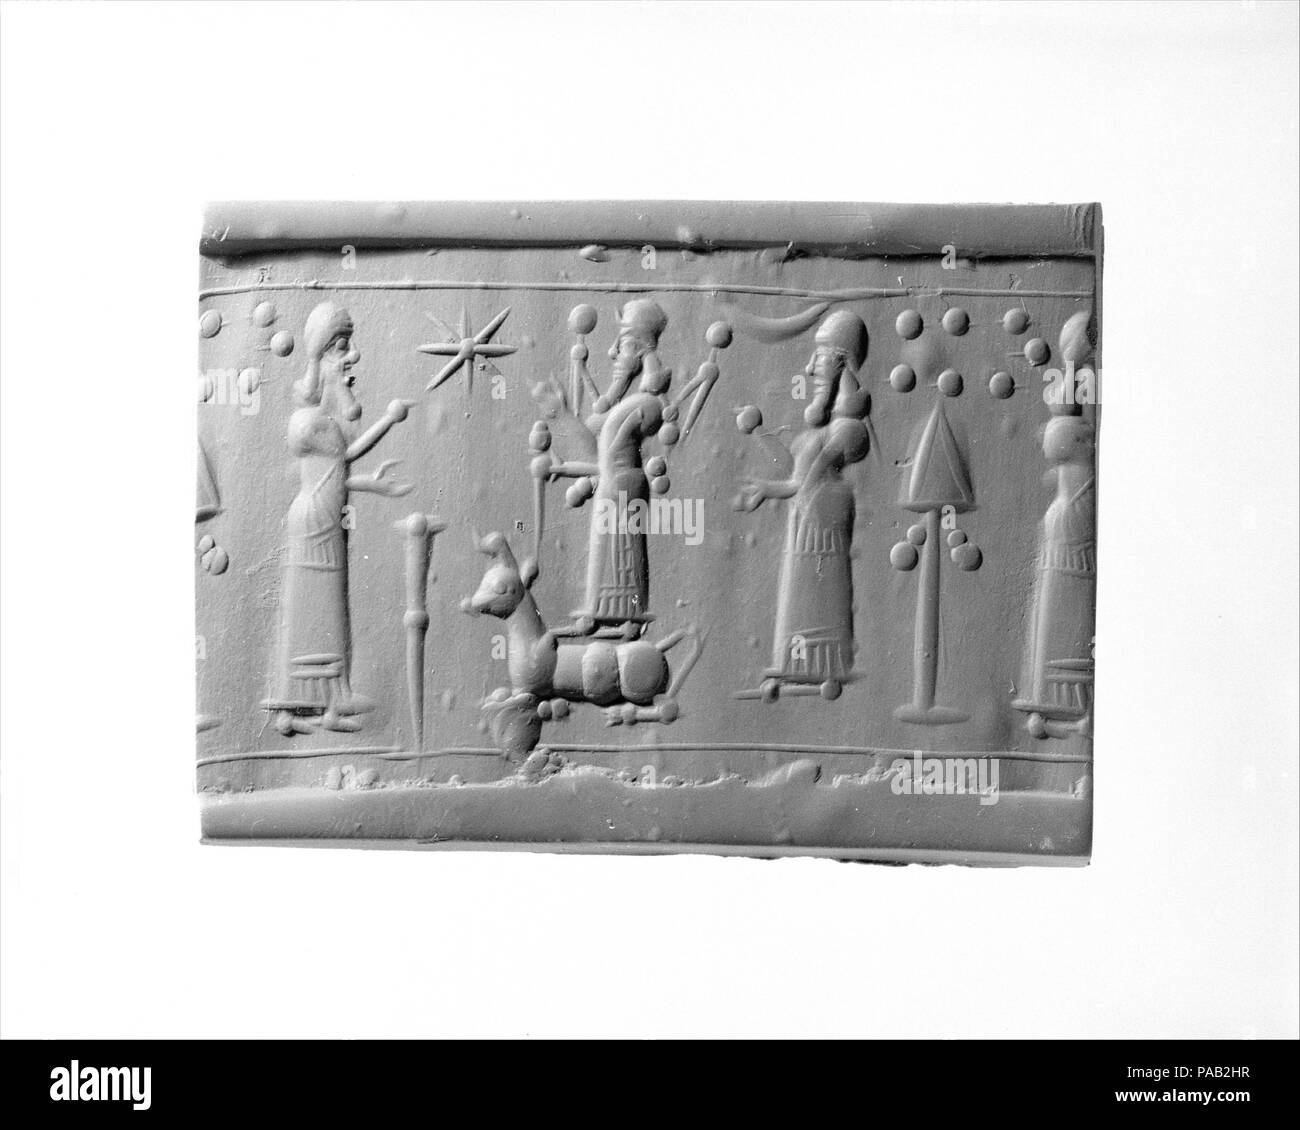 Cylinder seal. Culture: Assyrian. Dimensions: 1.54 in. (3.91 cm). Date: ca. 9th-8th century B.C.. Museum: Metropolitan Museum of Art, New York, USA. Stock Photo